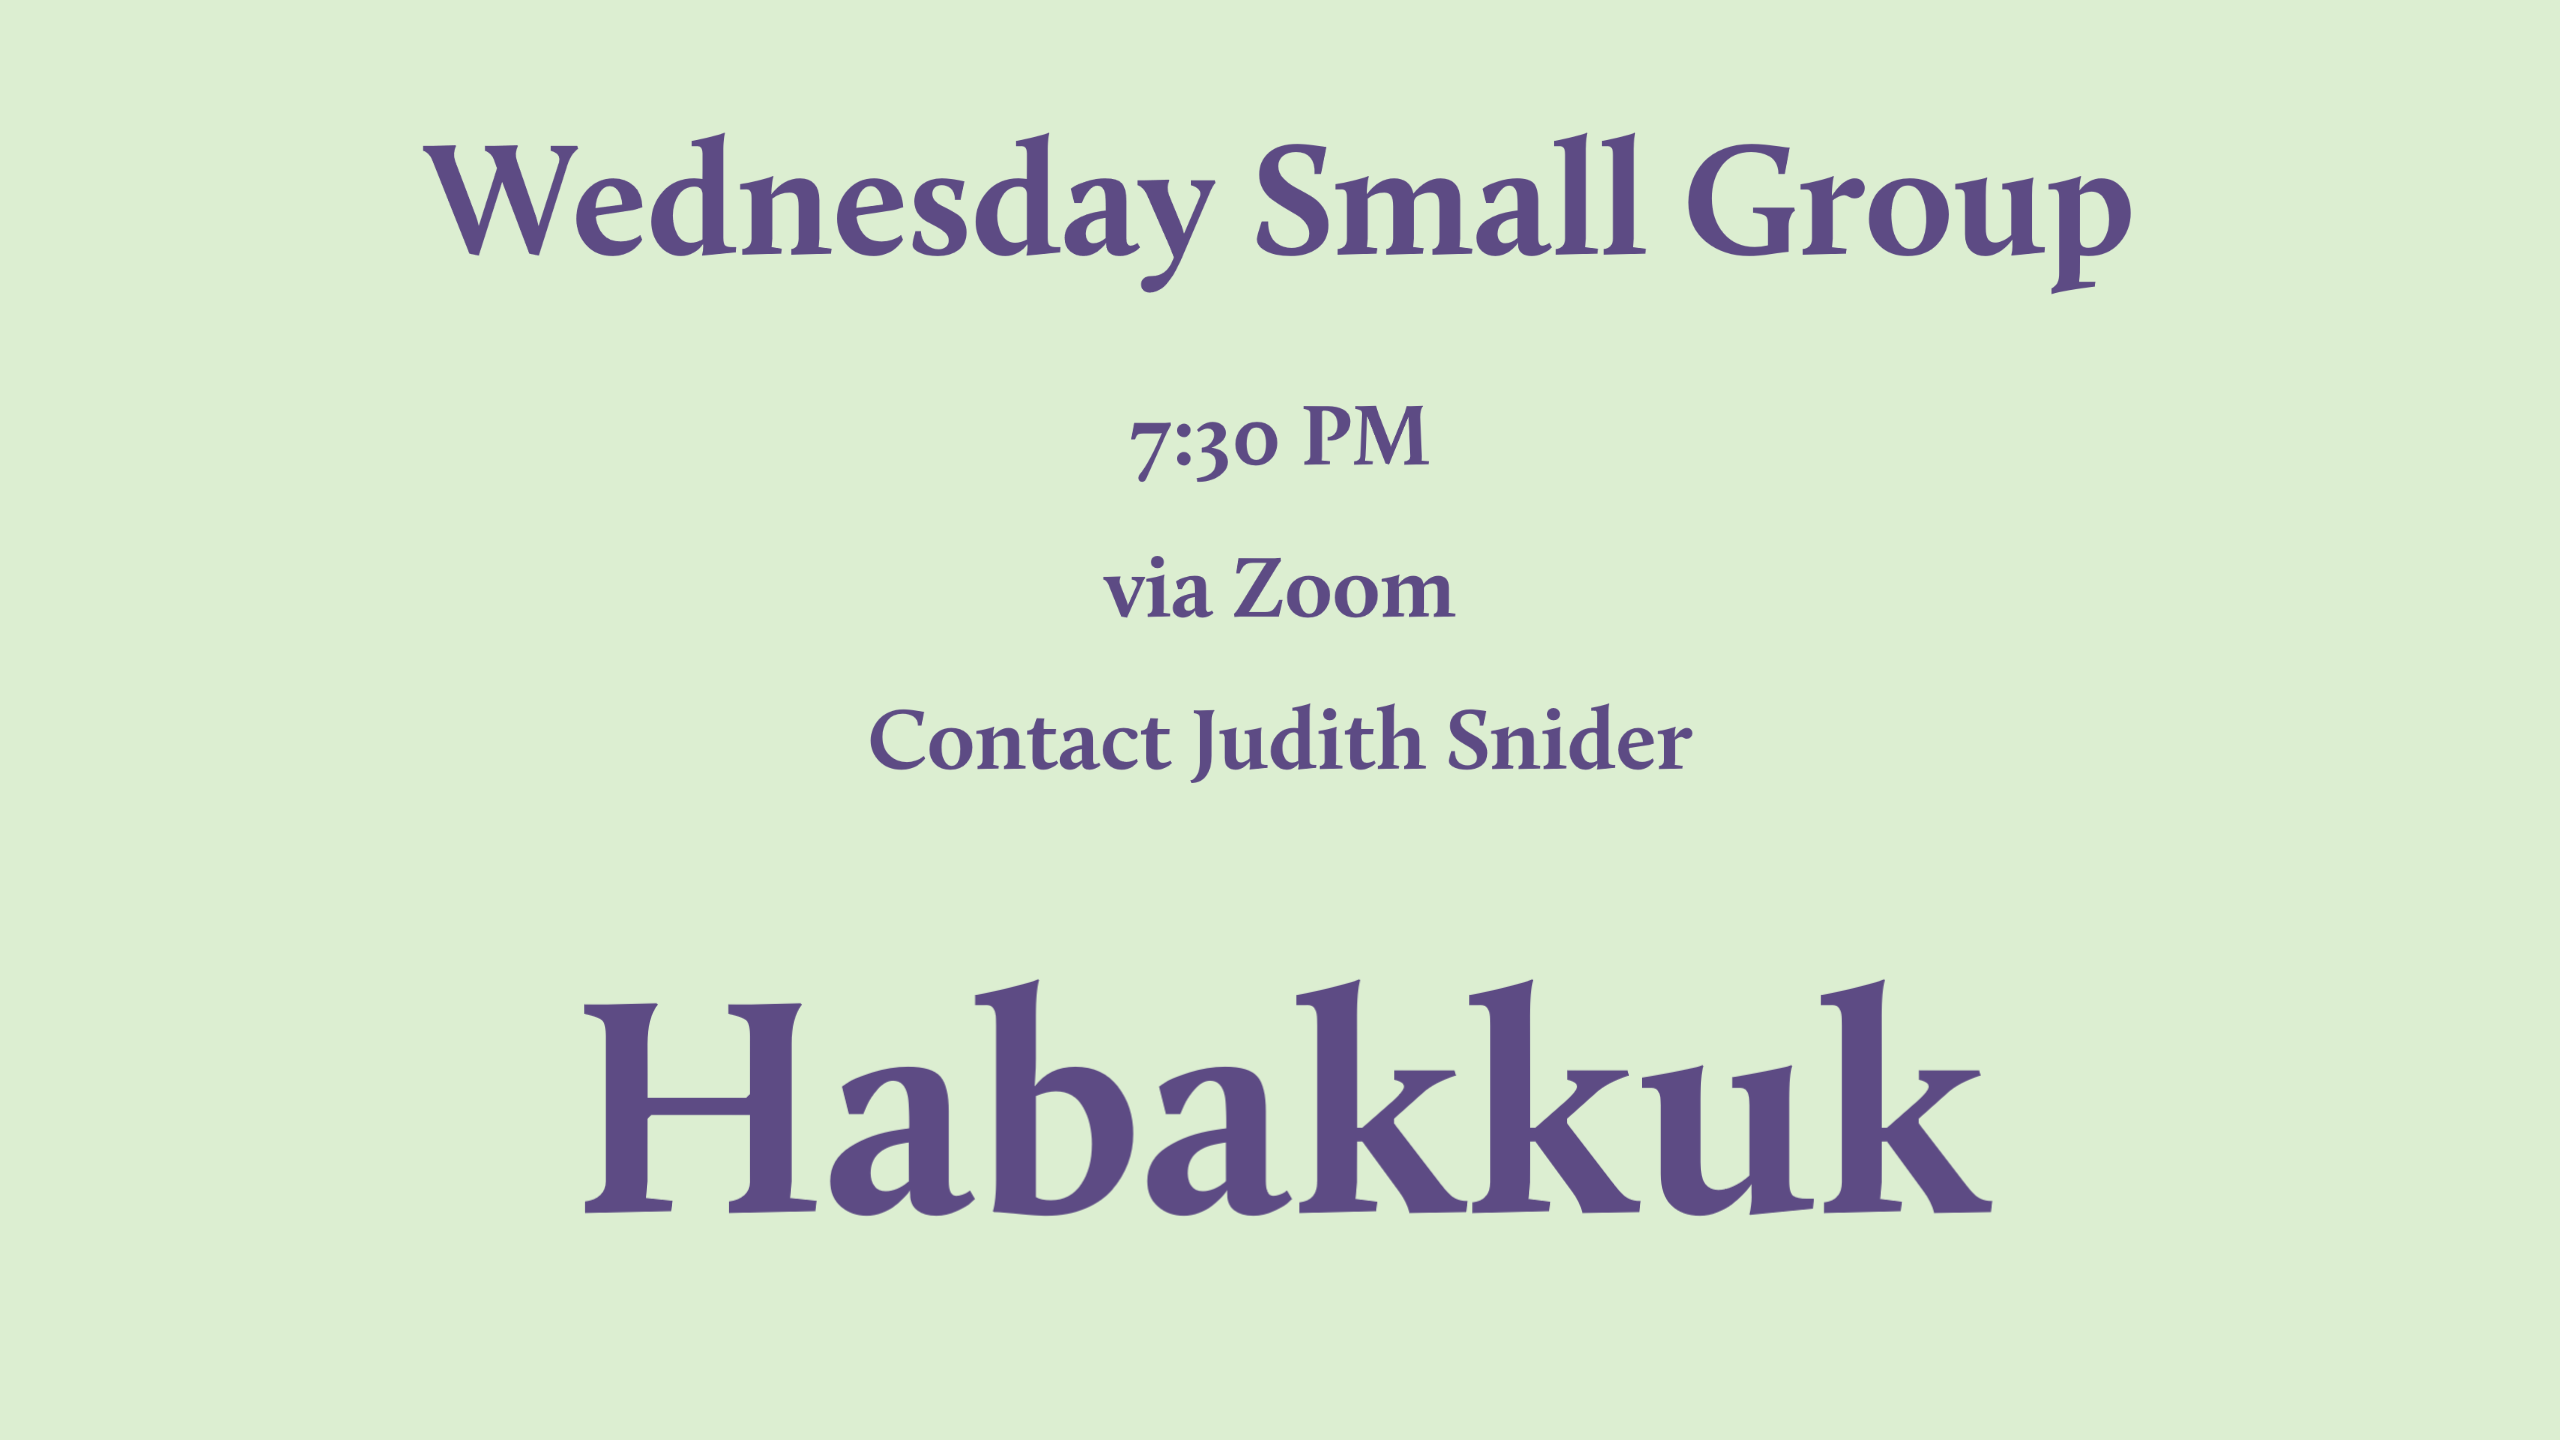 purple text on a green background reading "Wednesday Night Group 7:30 PM via Zoom Contact Judith Snider Habakkuk"